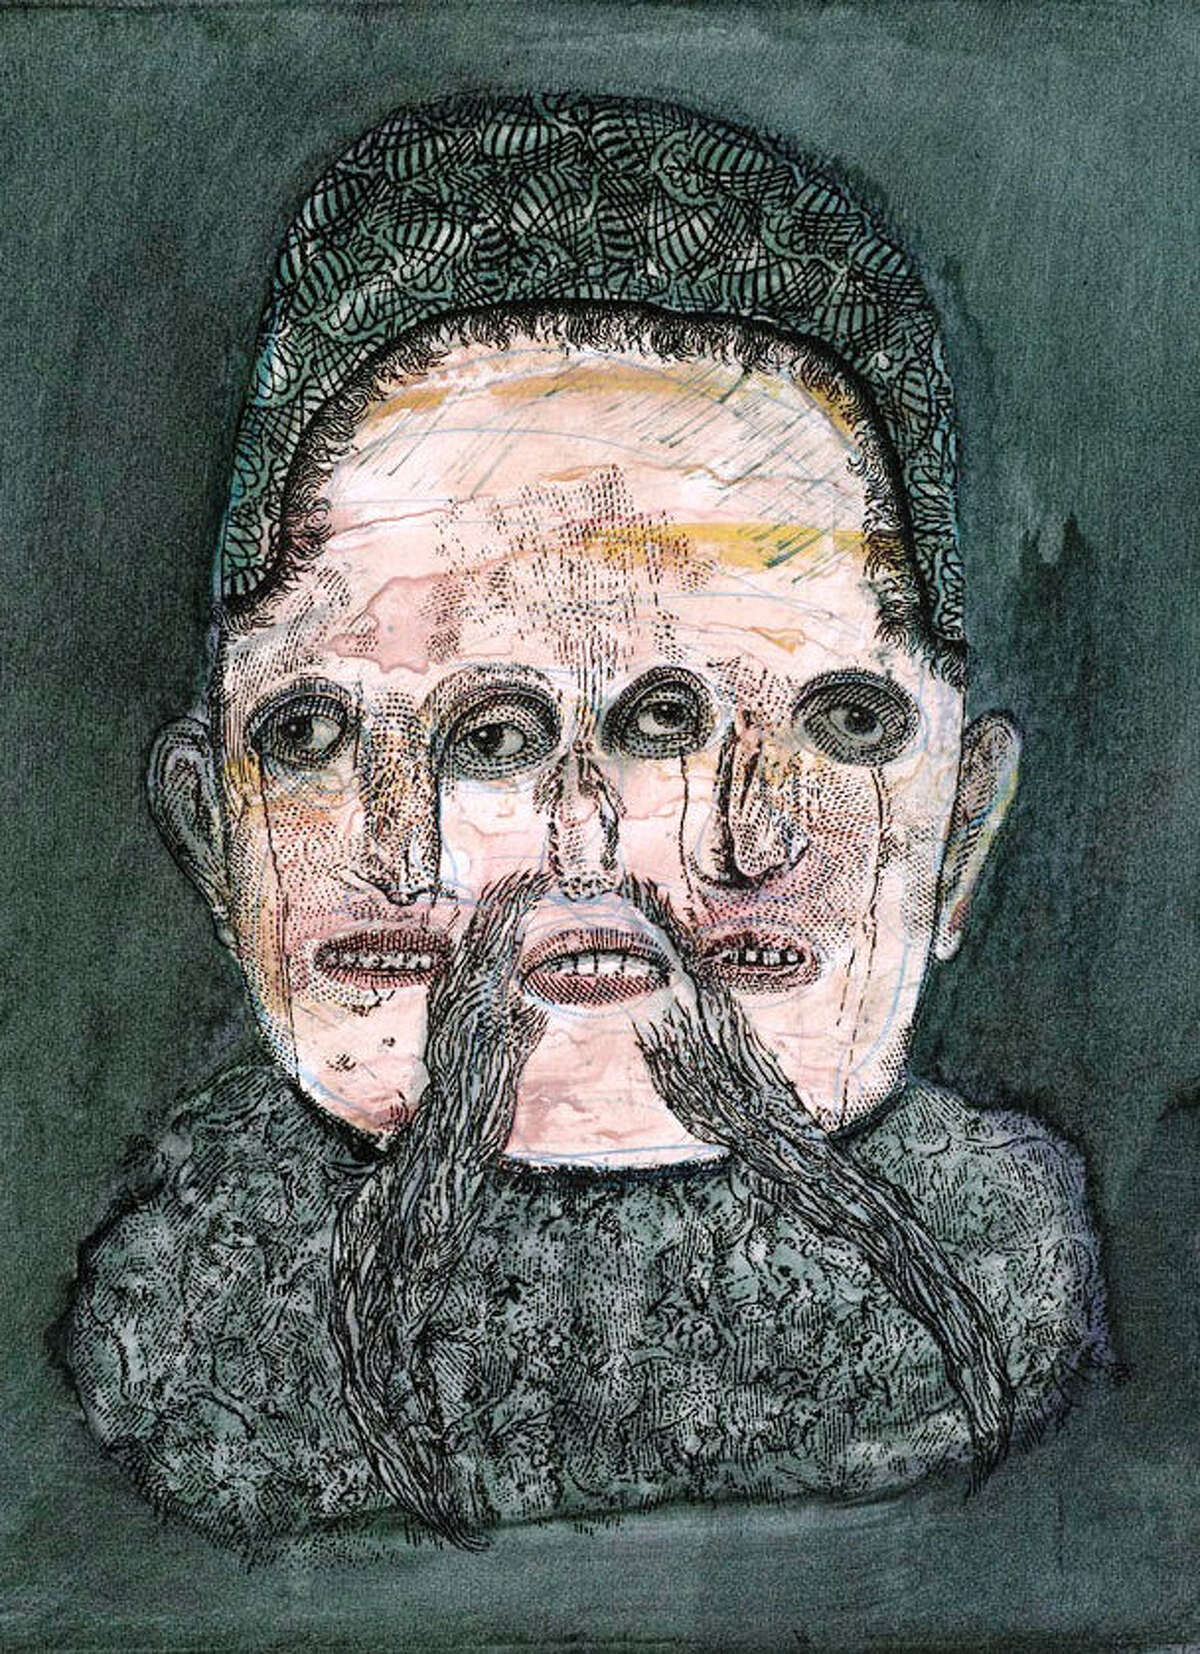 The impartial, three-faced “Judge Tibor” is part of Dennis Olsen's “village” of “Flash Fictions” on view at REM Gallery.